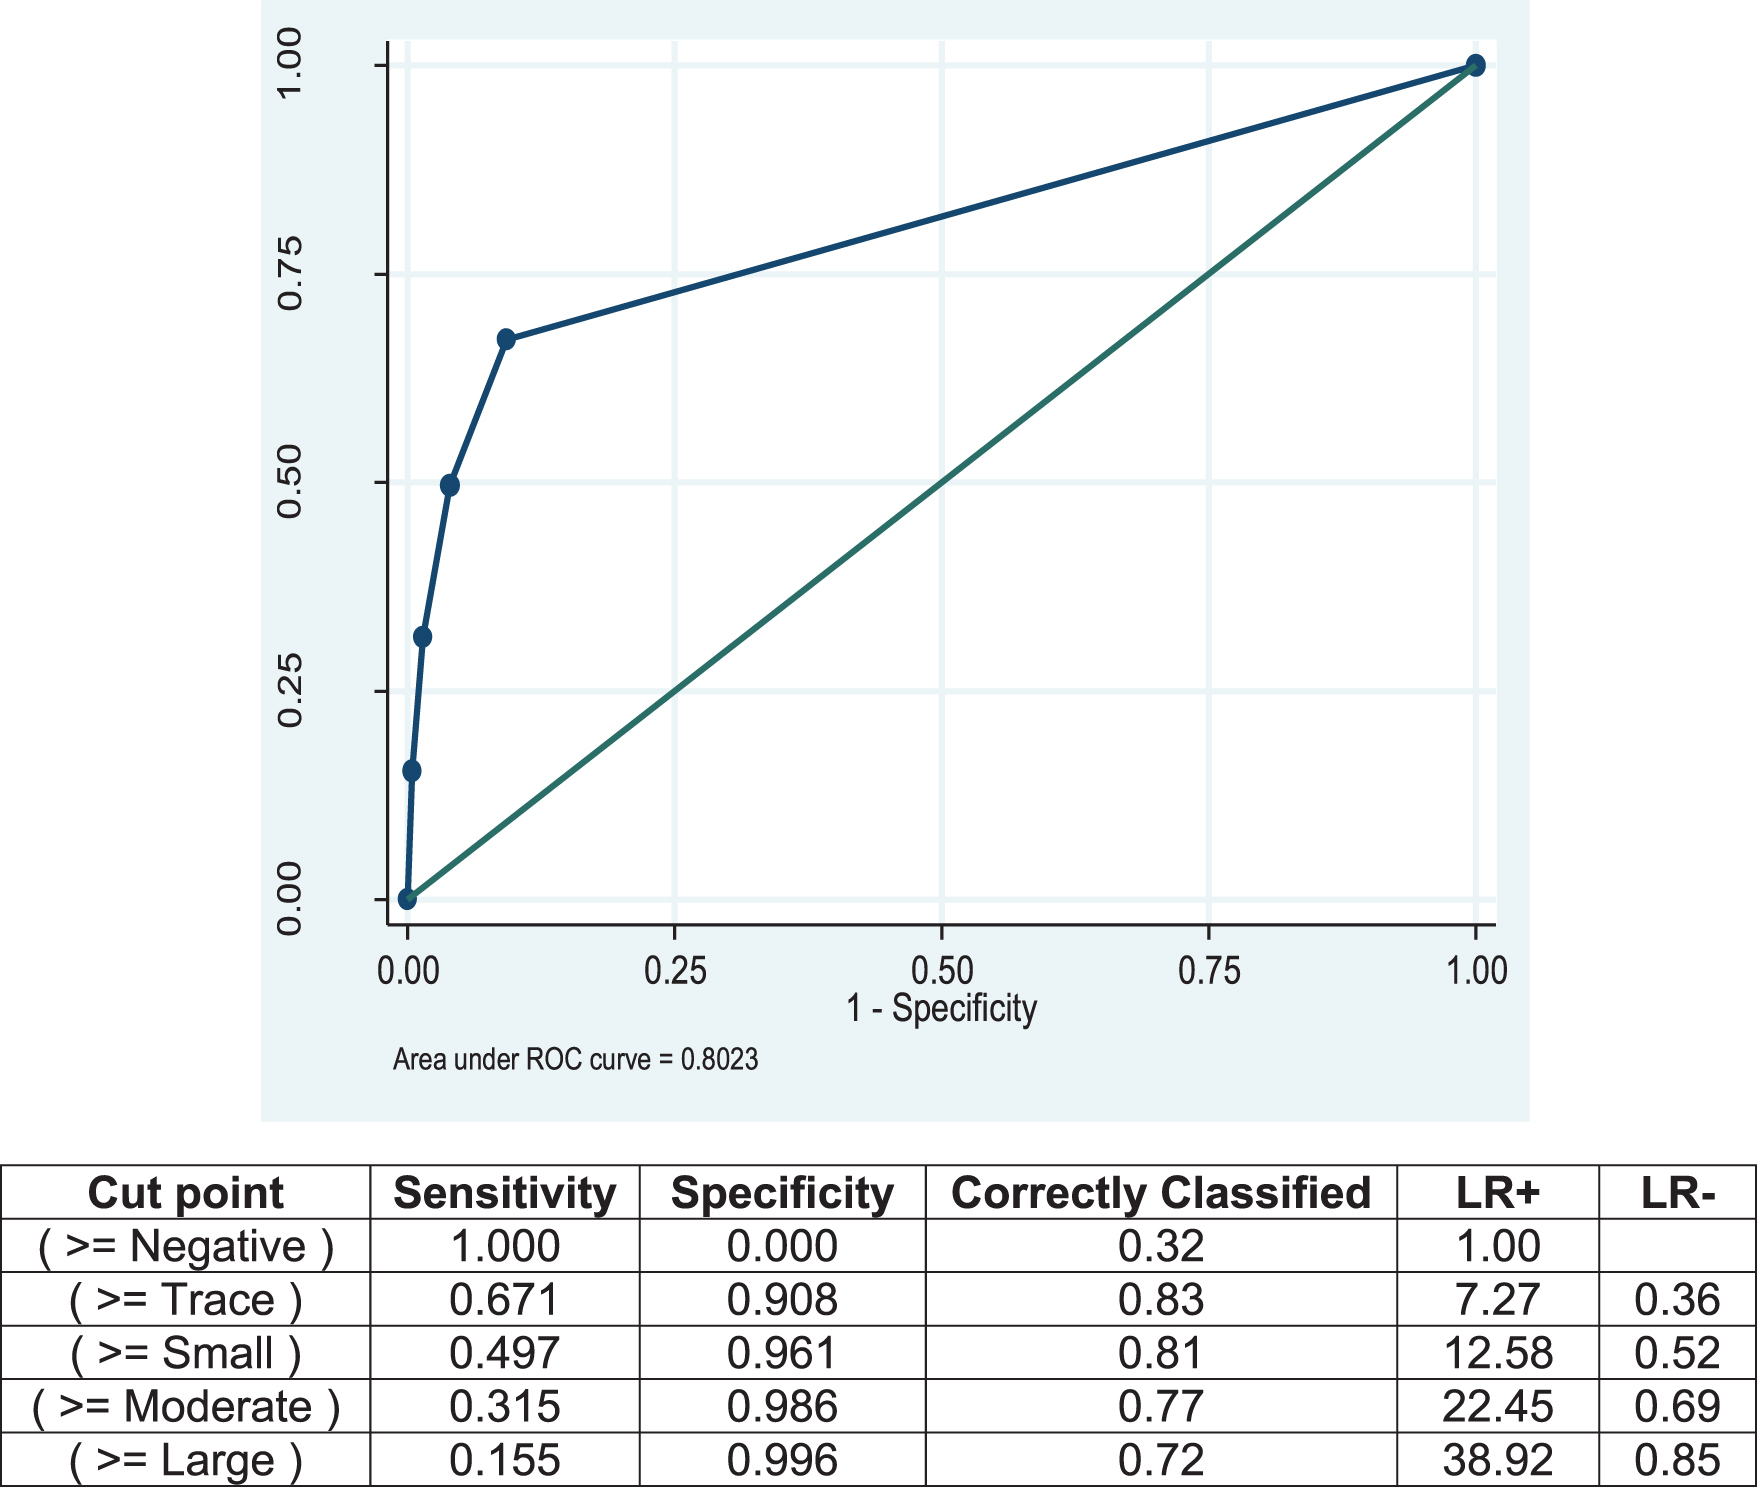 ROC Curve for dipstick urinalysis compared to the gold standard, microscopic urinalysis.